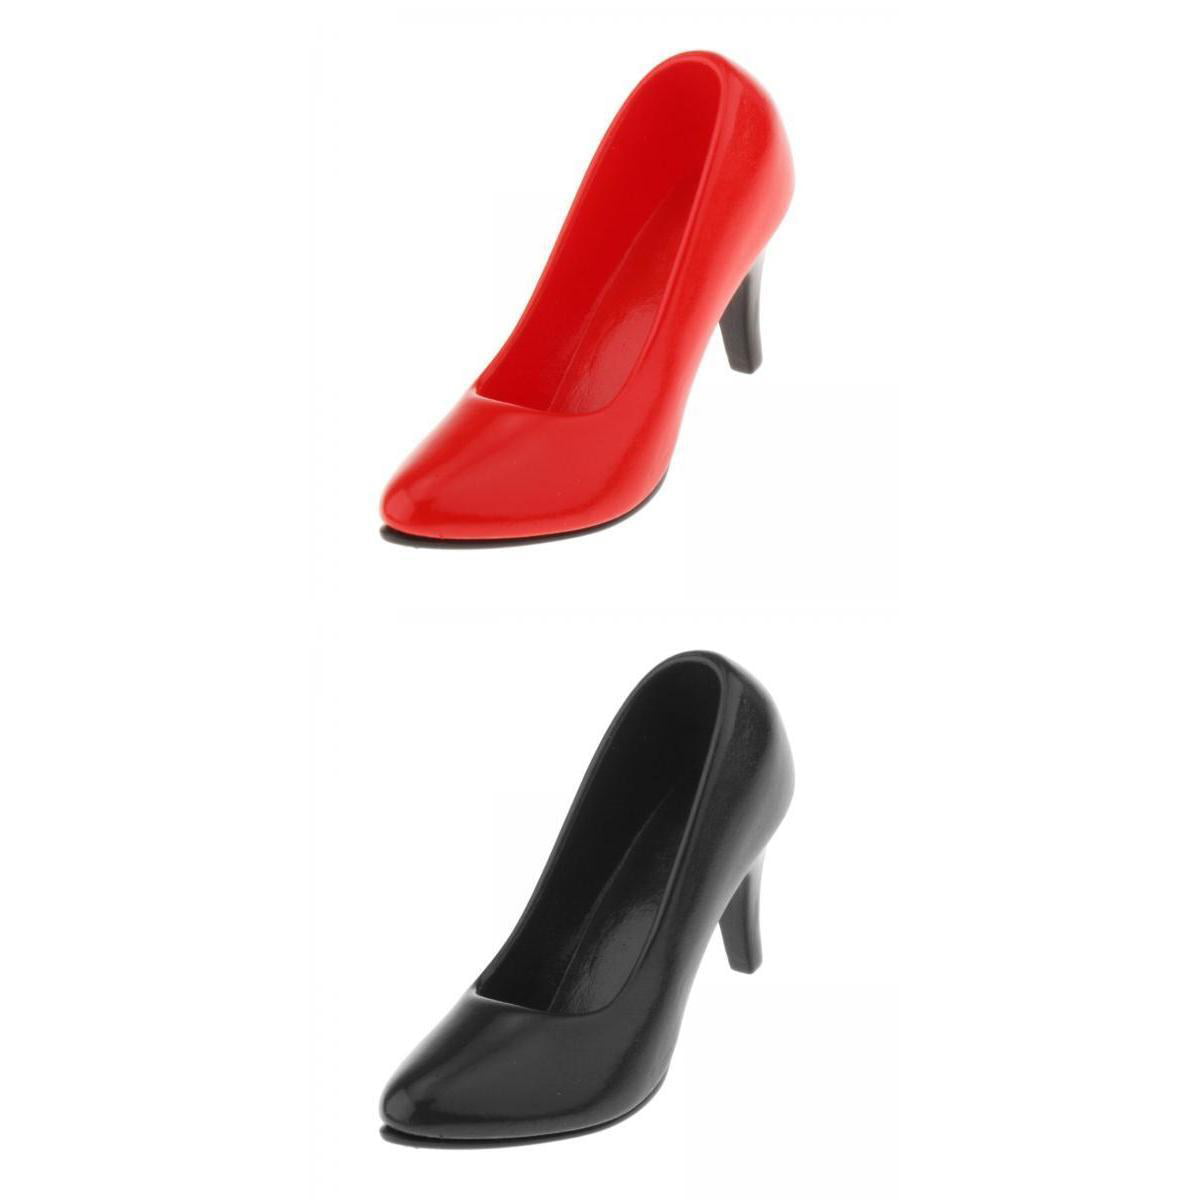 Red 1/6 Scale Stiletto Heeled Shoes for 12 inch Female Figure Clothing 